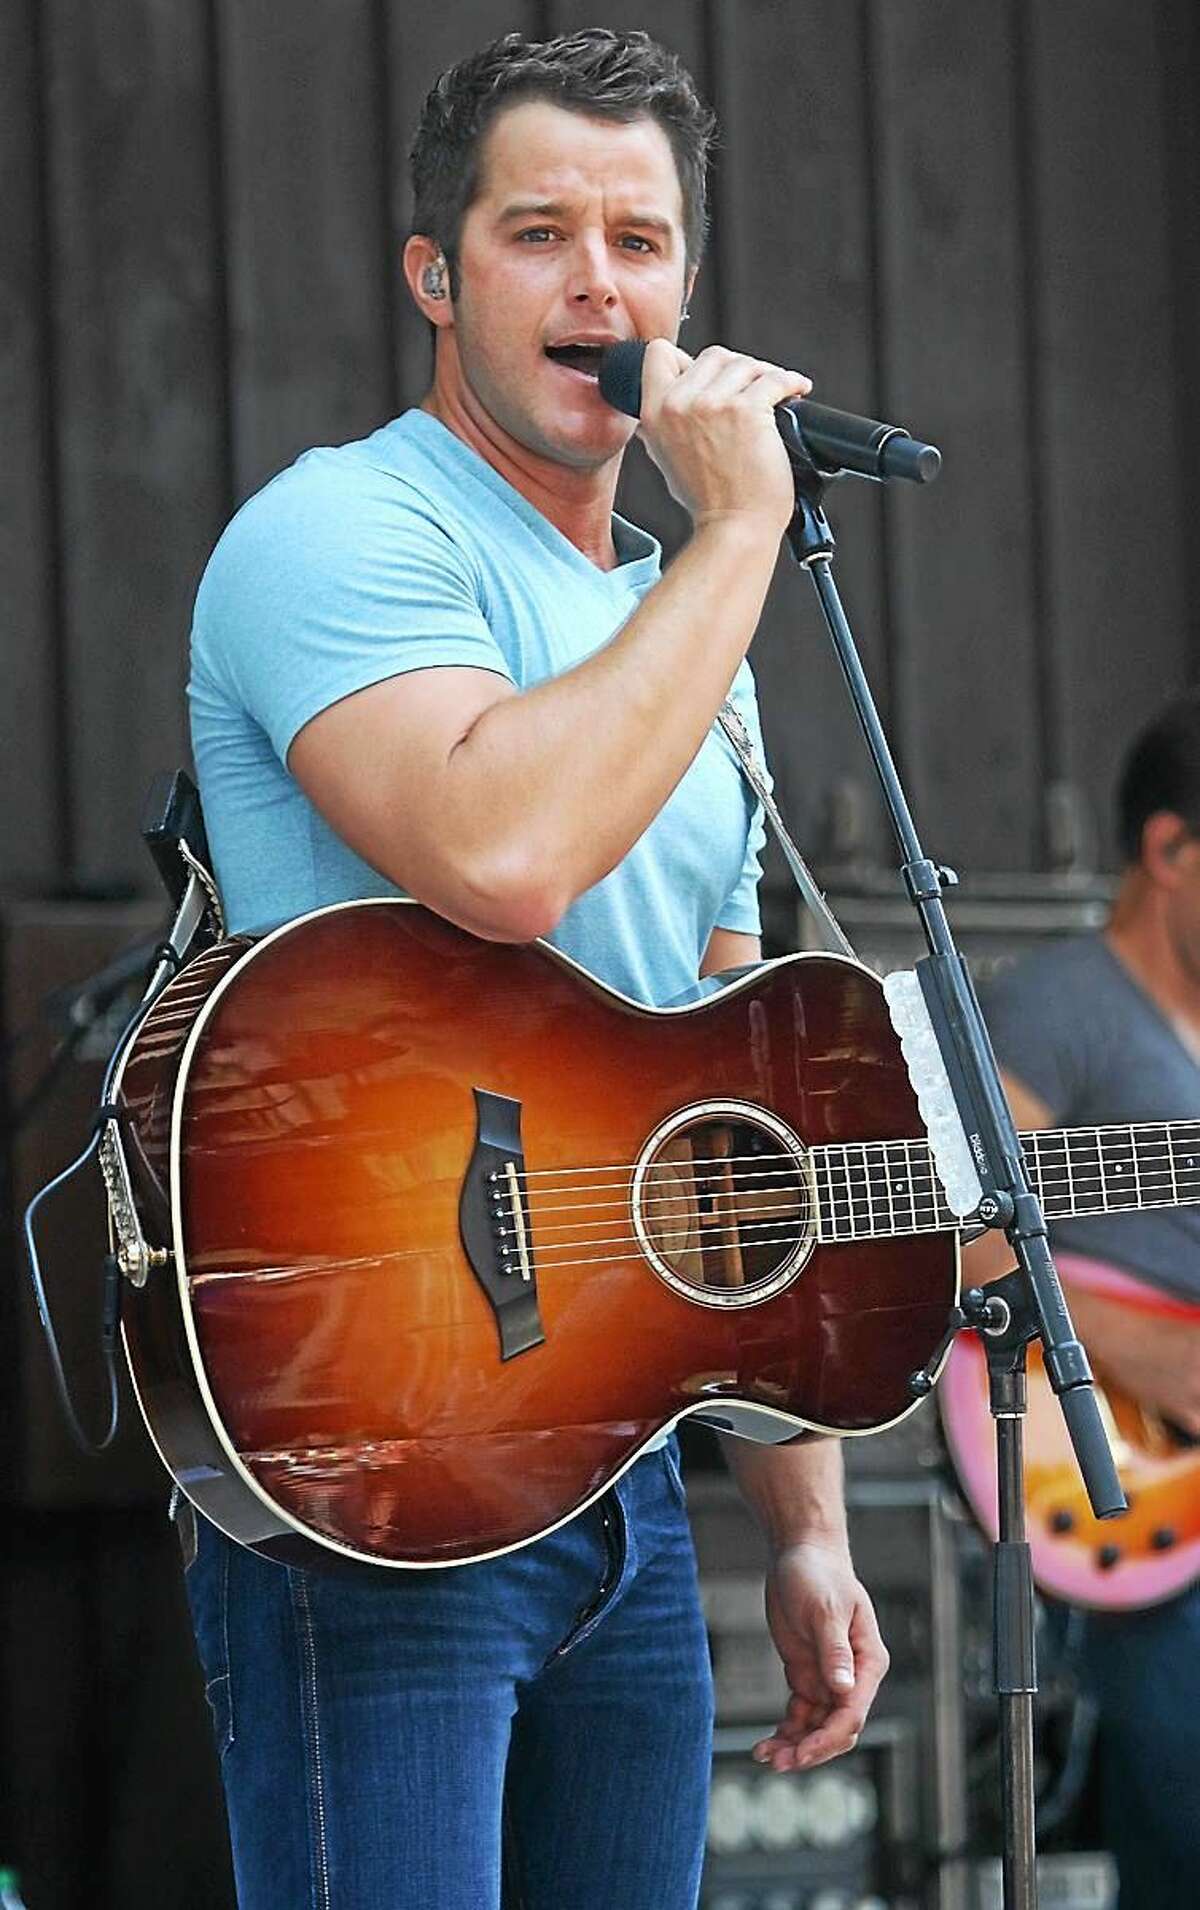 Photo by John Atashian Country music star Easton Corbin is shown performing on stage at Indian Ranch in Webster Massachusetts during his concert appearance on July 12. His debut self-titled debut album, featured two number one hits ìA Little More Country Than Thatî and Roll With Itî, as well as the number 14 hit ìI Canít Love You Backî. His second album, ìAll Over The Roadî, was released in 2012 and has sold over 470,000 albums and over 2 million singles. To learn more about the outdoor summer concerts coming to Indian Ranch you can visit www.indianranch.com.